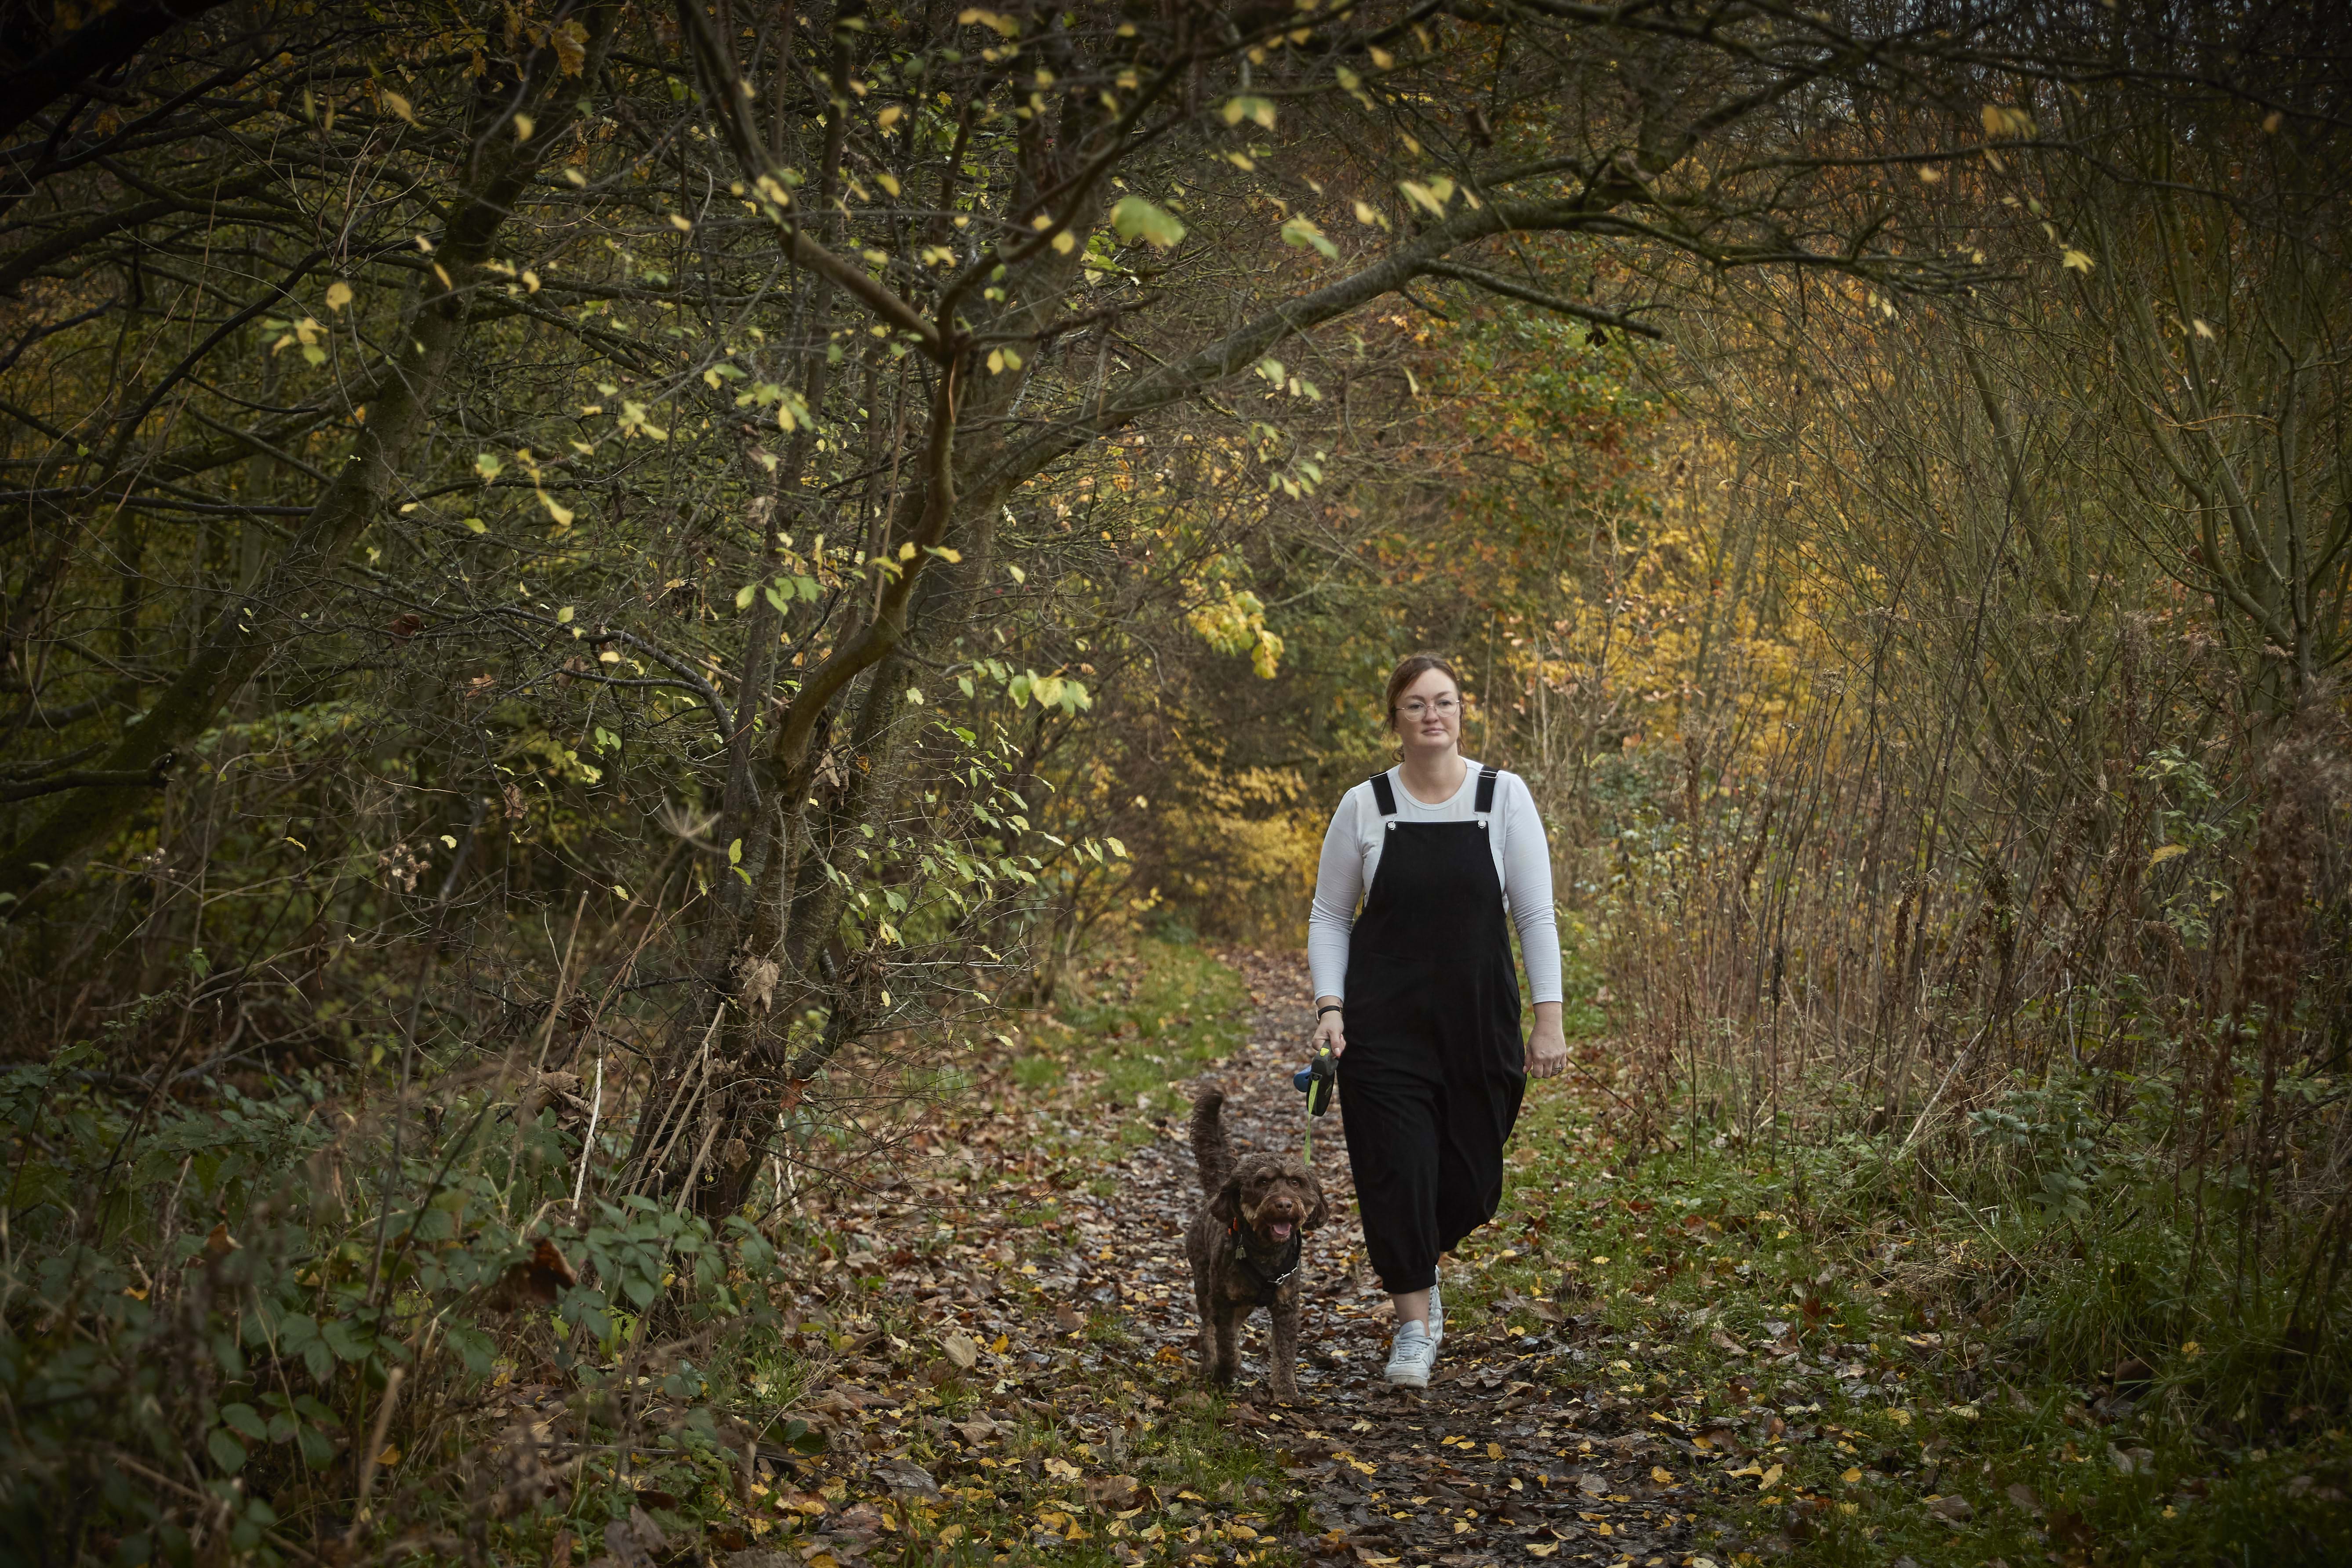 A woman walking a dog in the woods